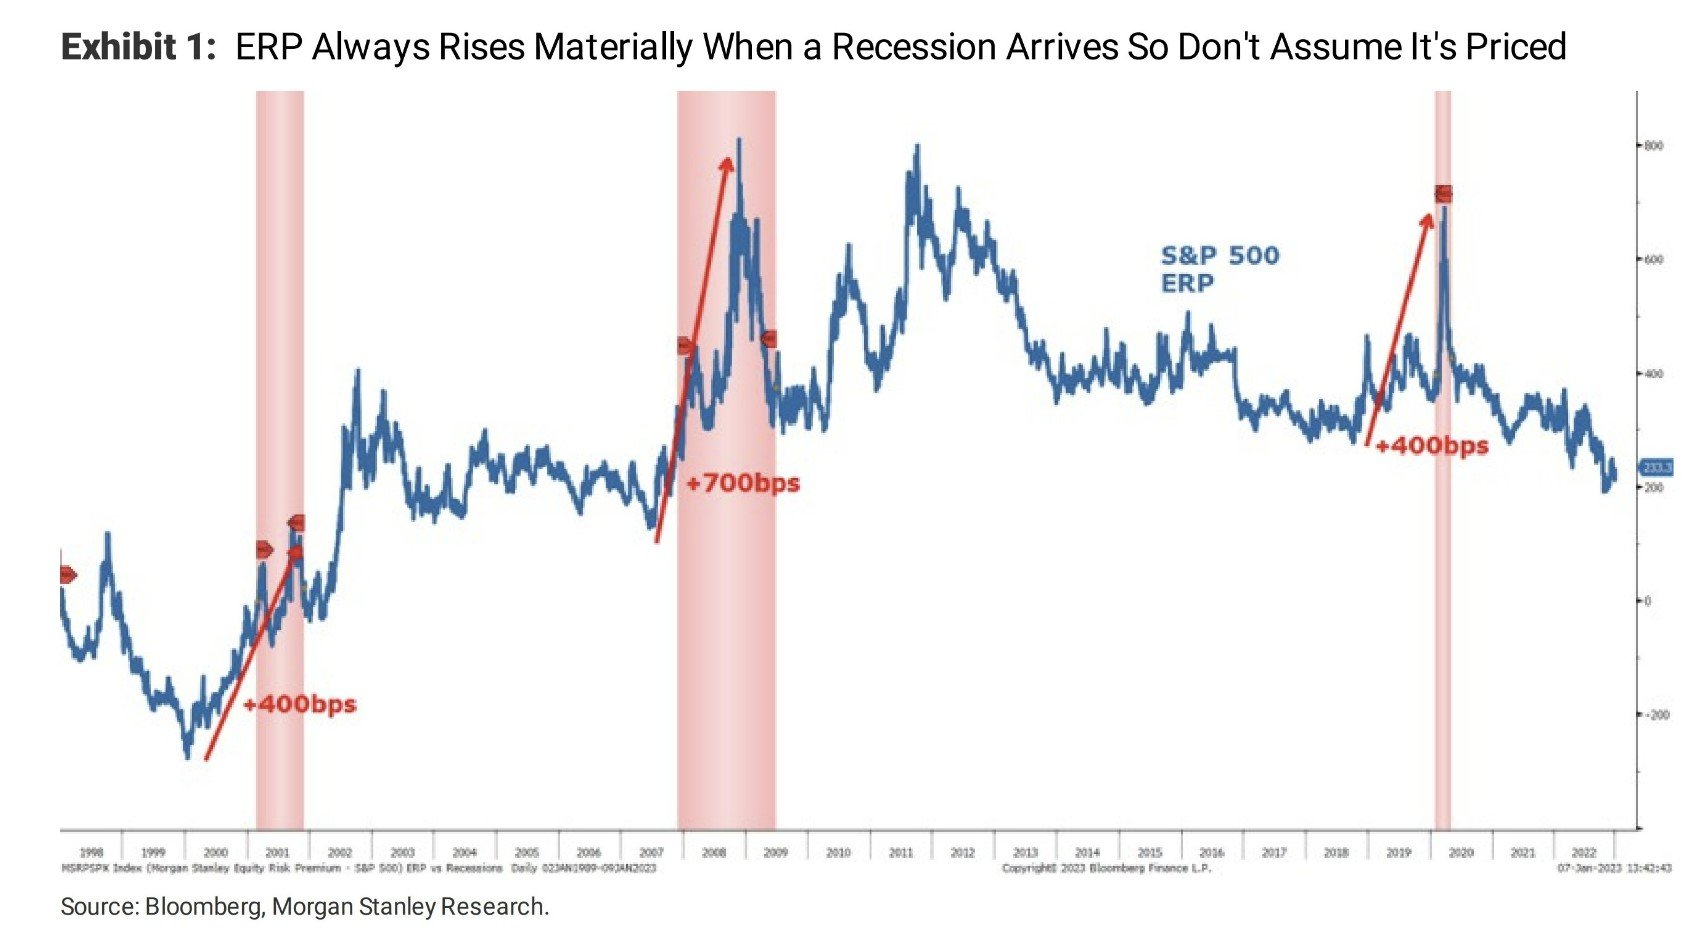 Recession hasn't been discounted by the stock market